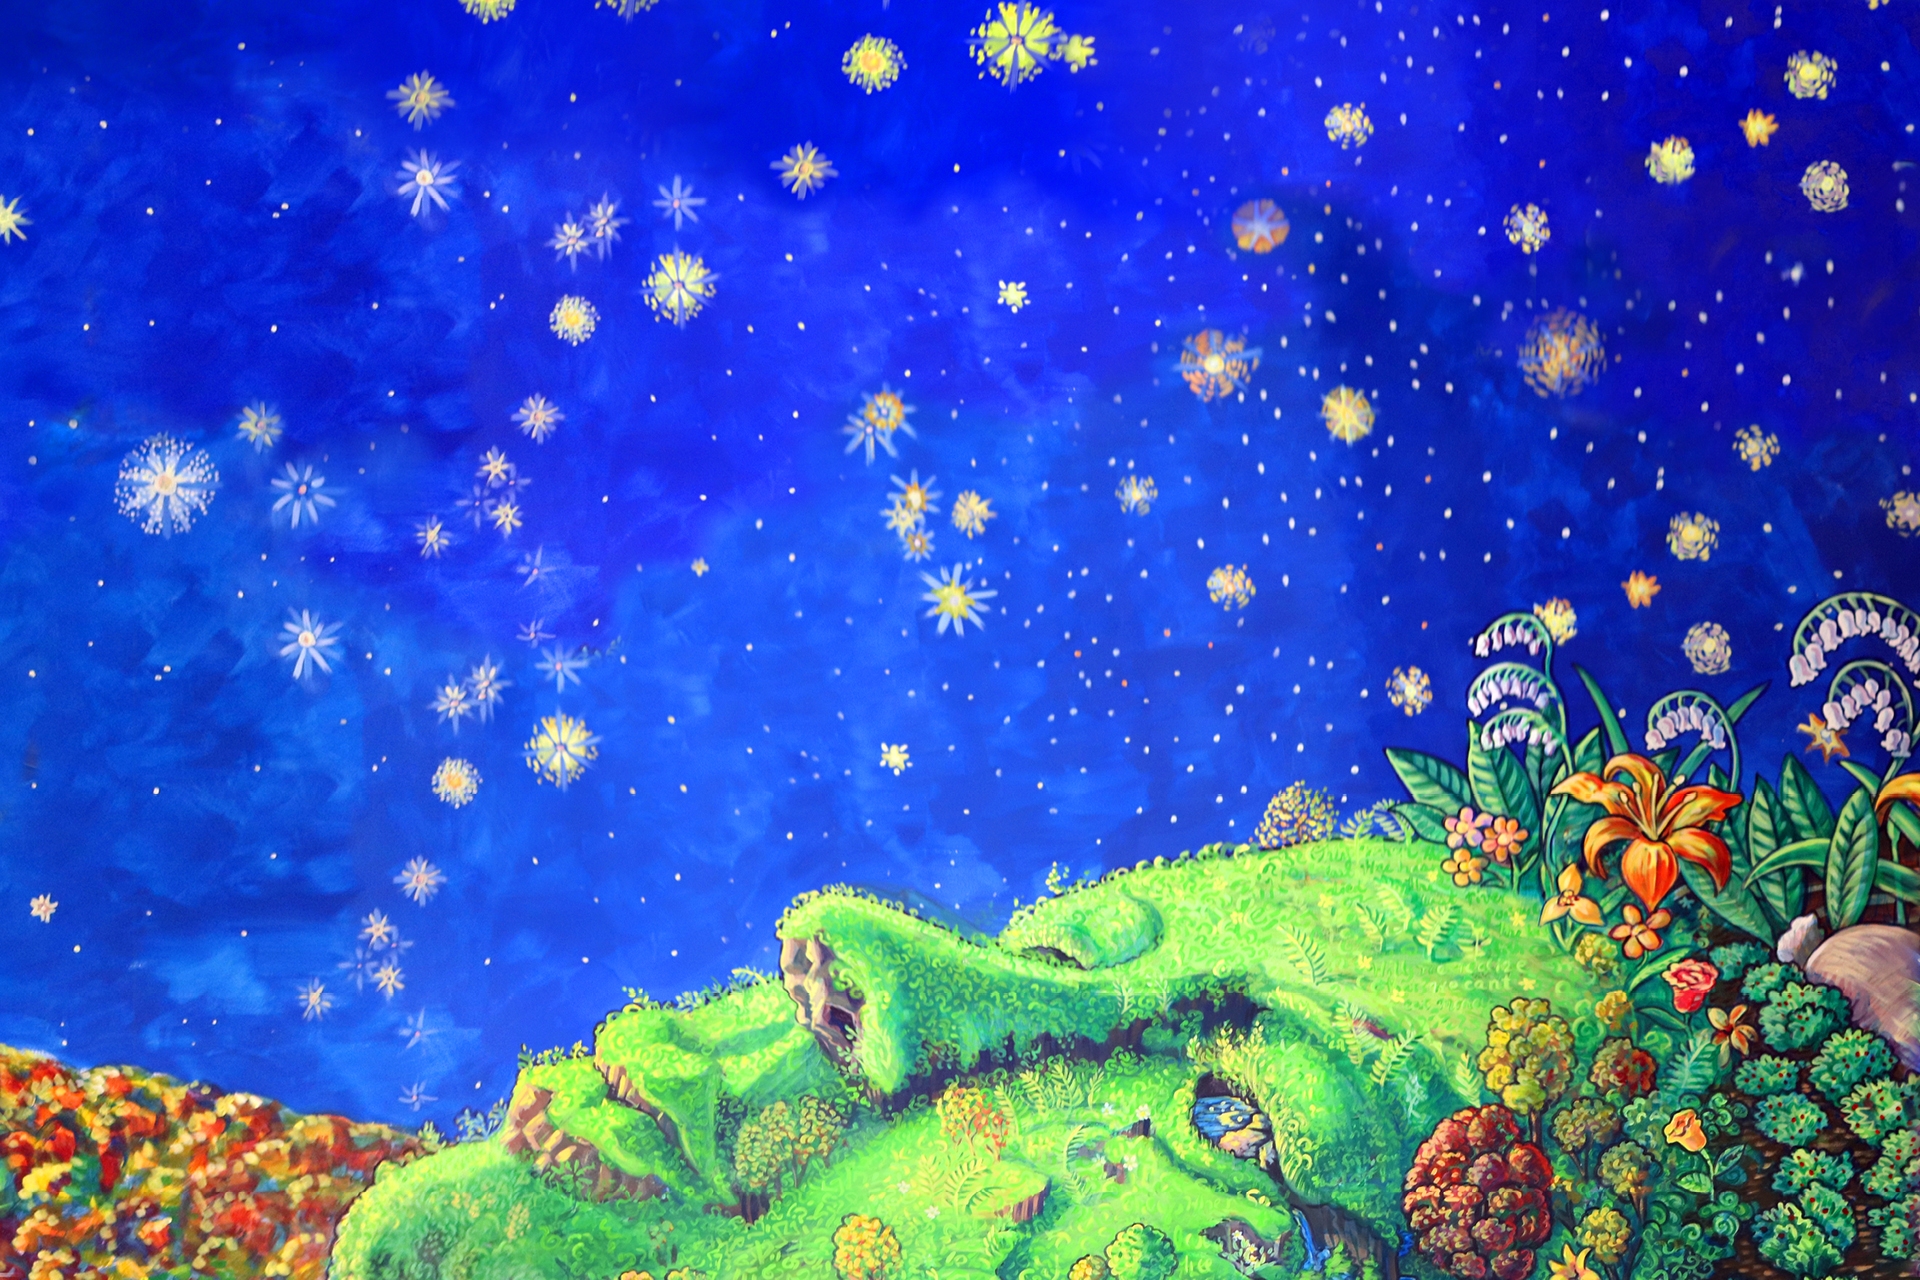 At the bottom of the image, a woman's face in profile that is in the form of a hillside. Her skin is grass and her hair is a garden patch with vegetables and flowers. She looks up at a dark blue sky dotted with yellow and white abstract stars.